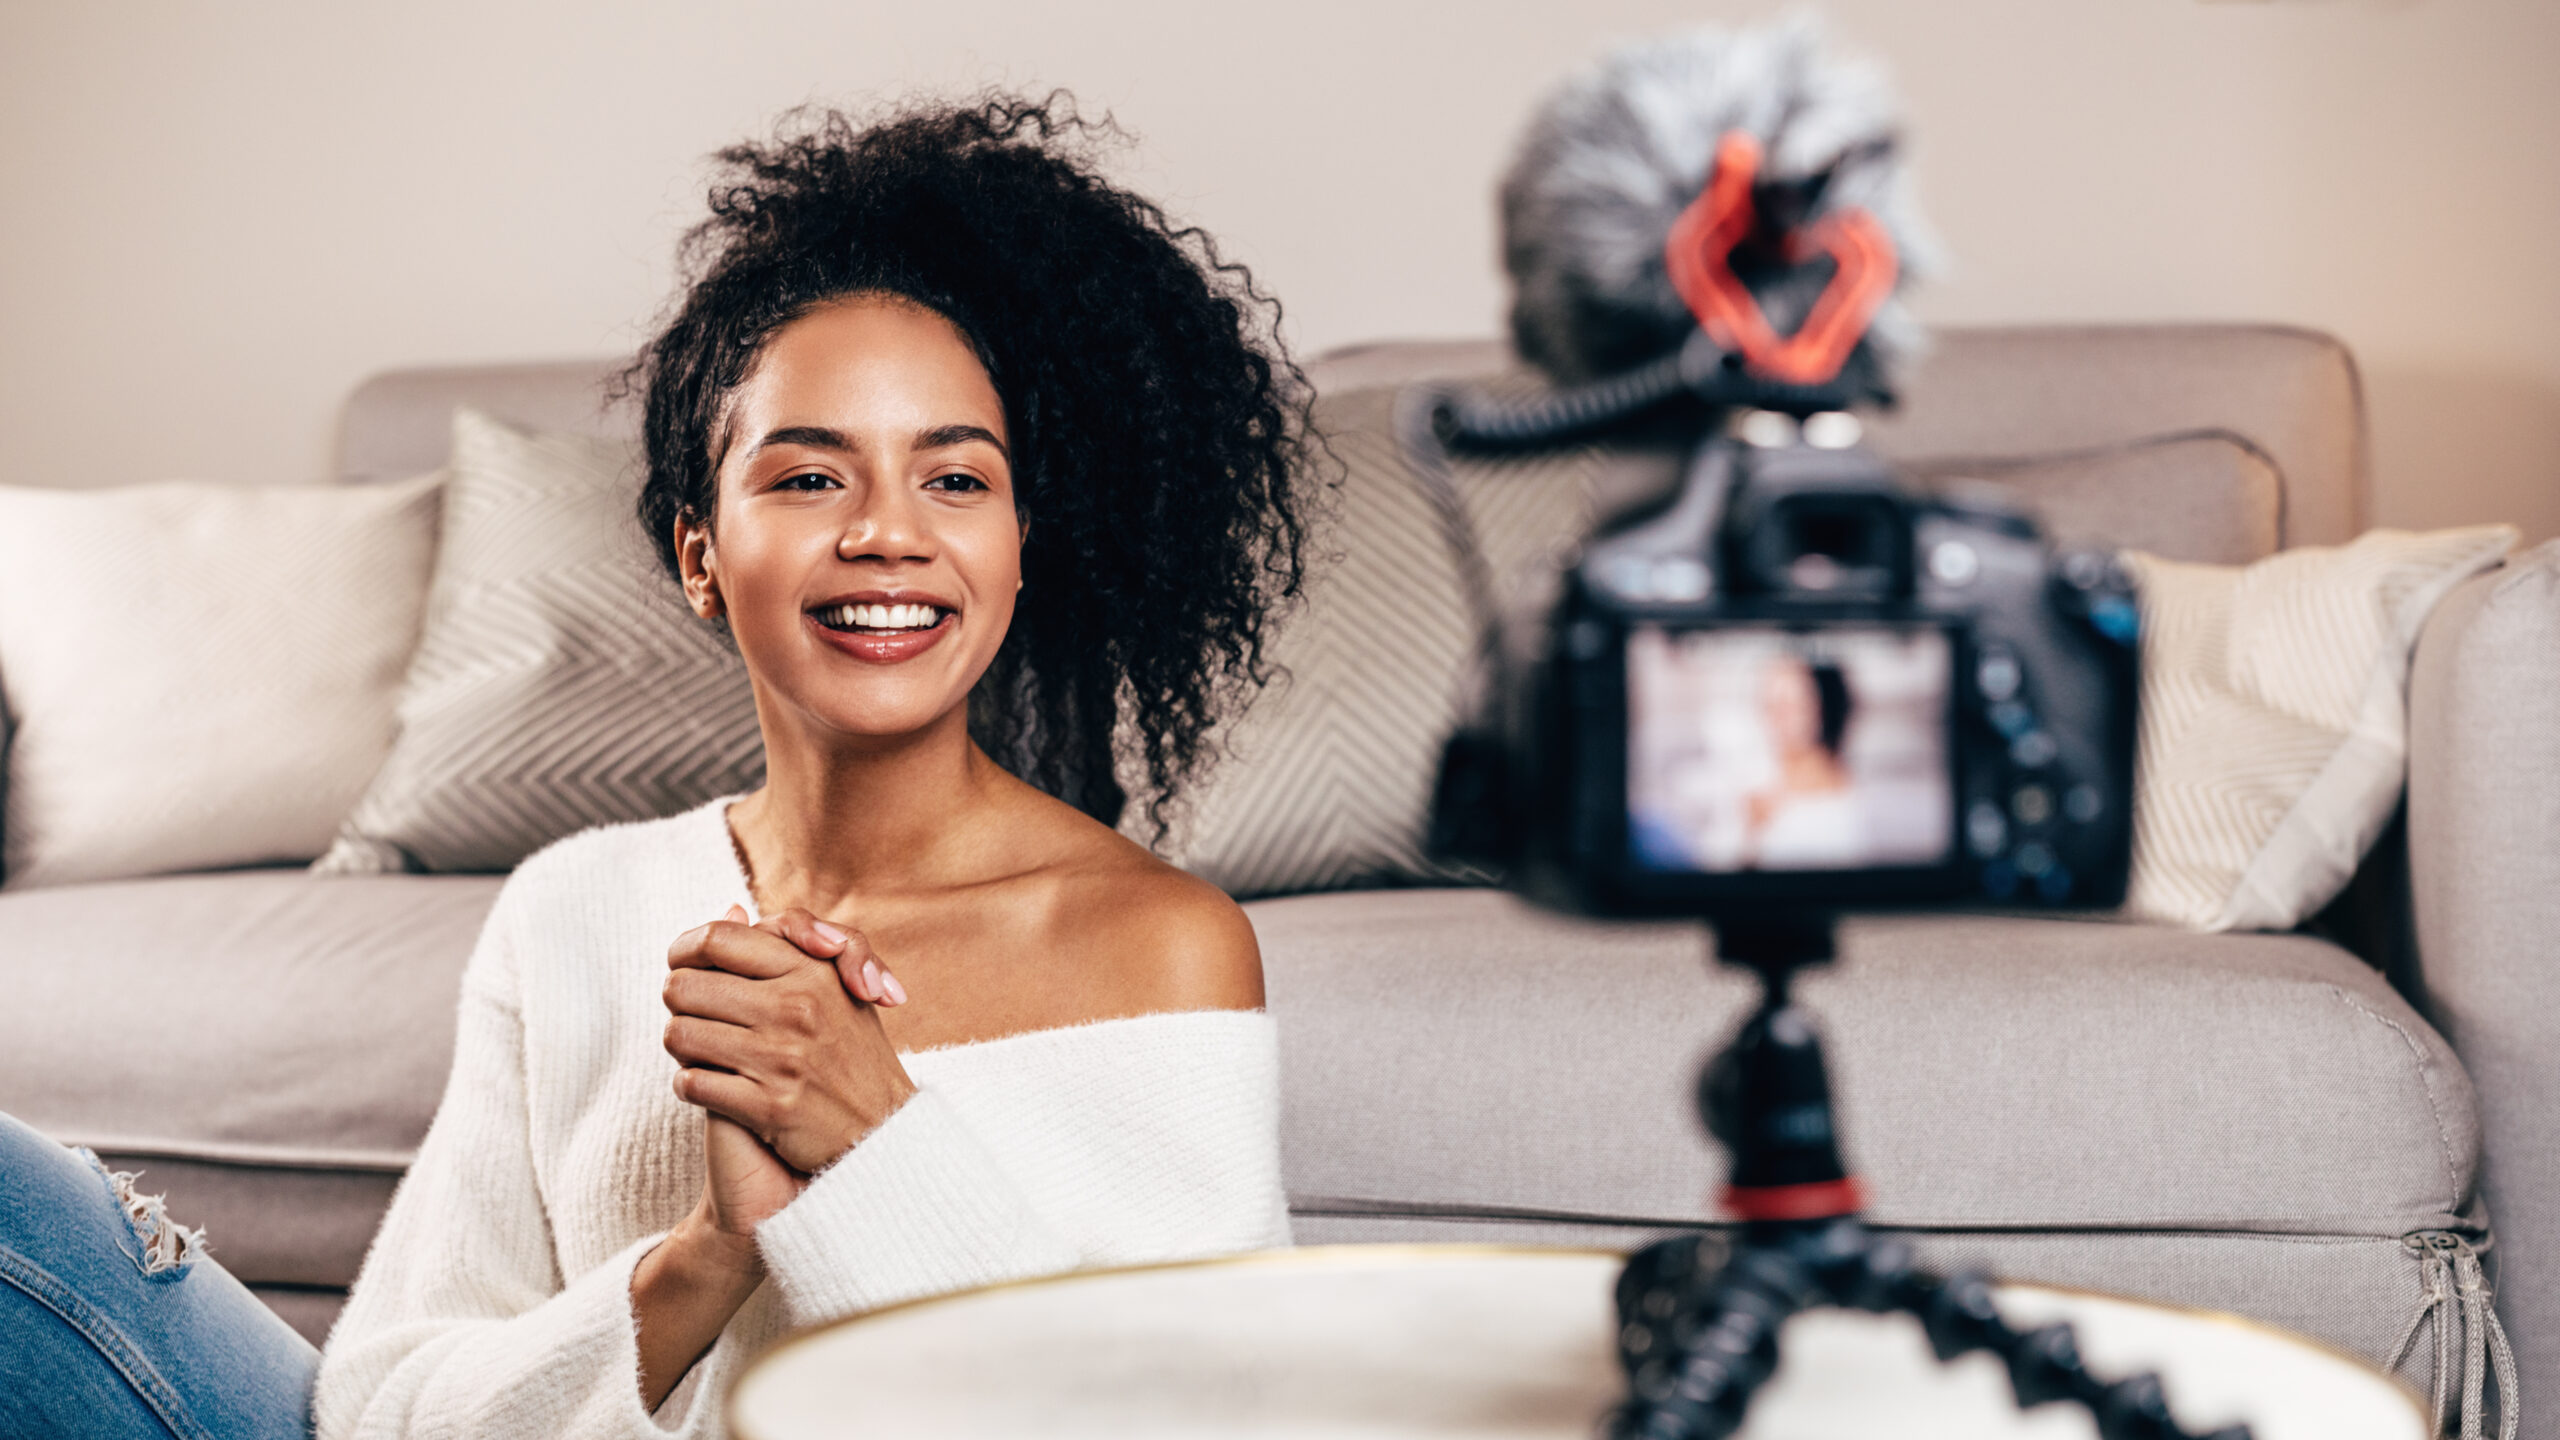 African American woman live streaming from living room to build an audience online.